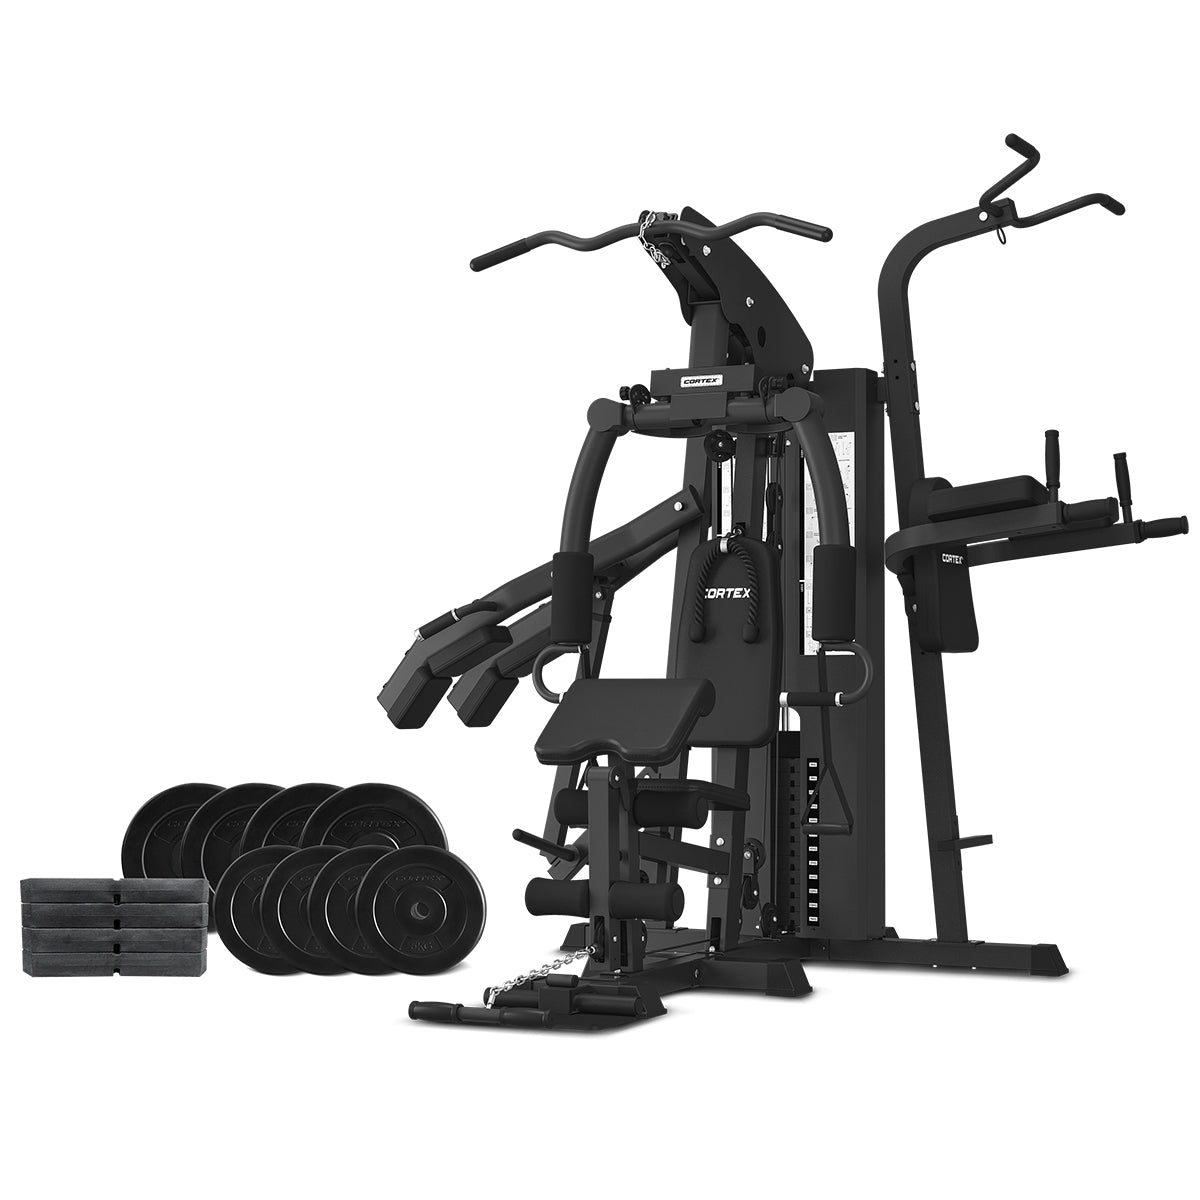 CORTEX GS7 Home Gym with 98kg Stack + 60kg Weight Package